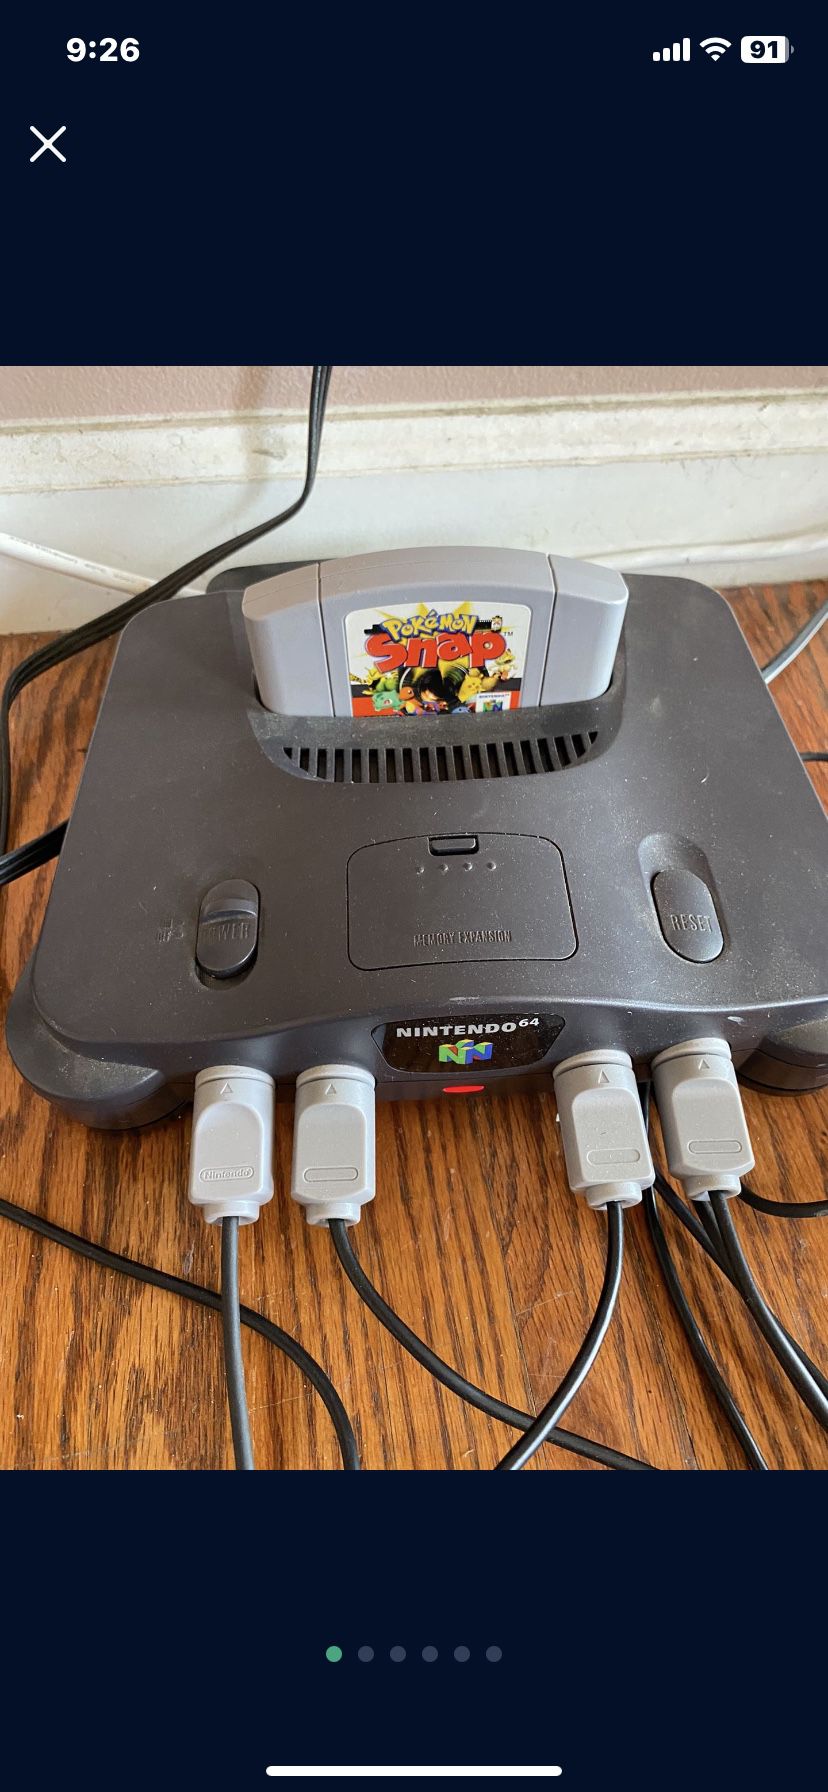 Nintendo 64 With 5 Games And Four Controllers 